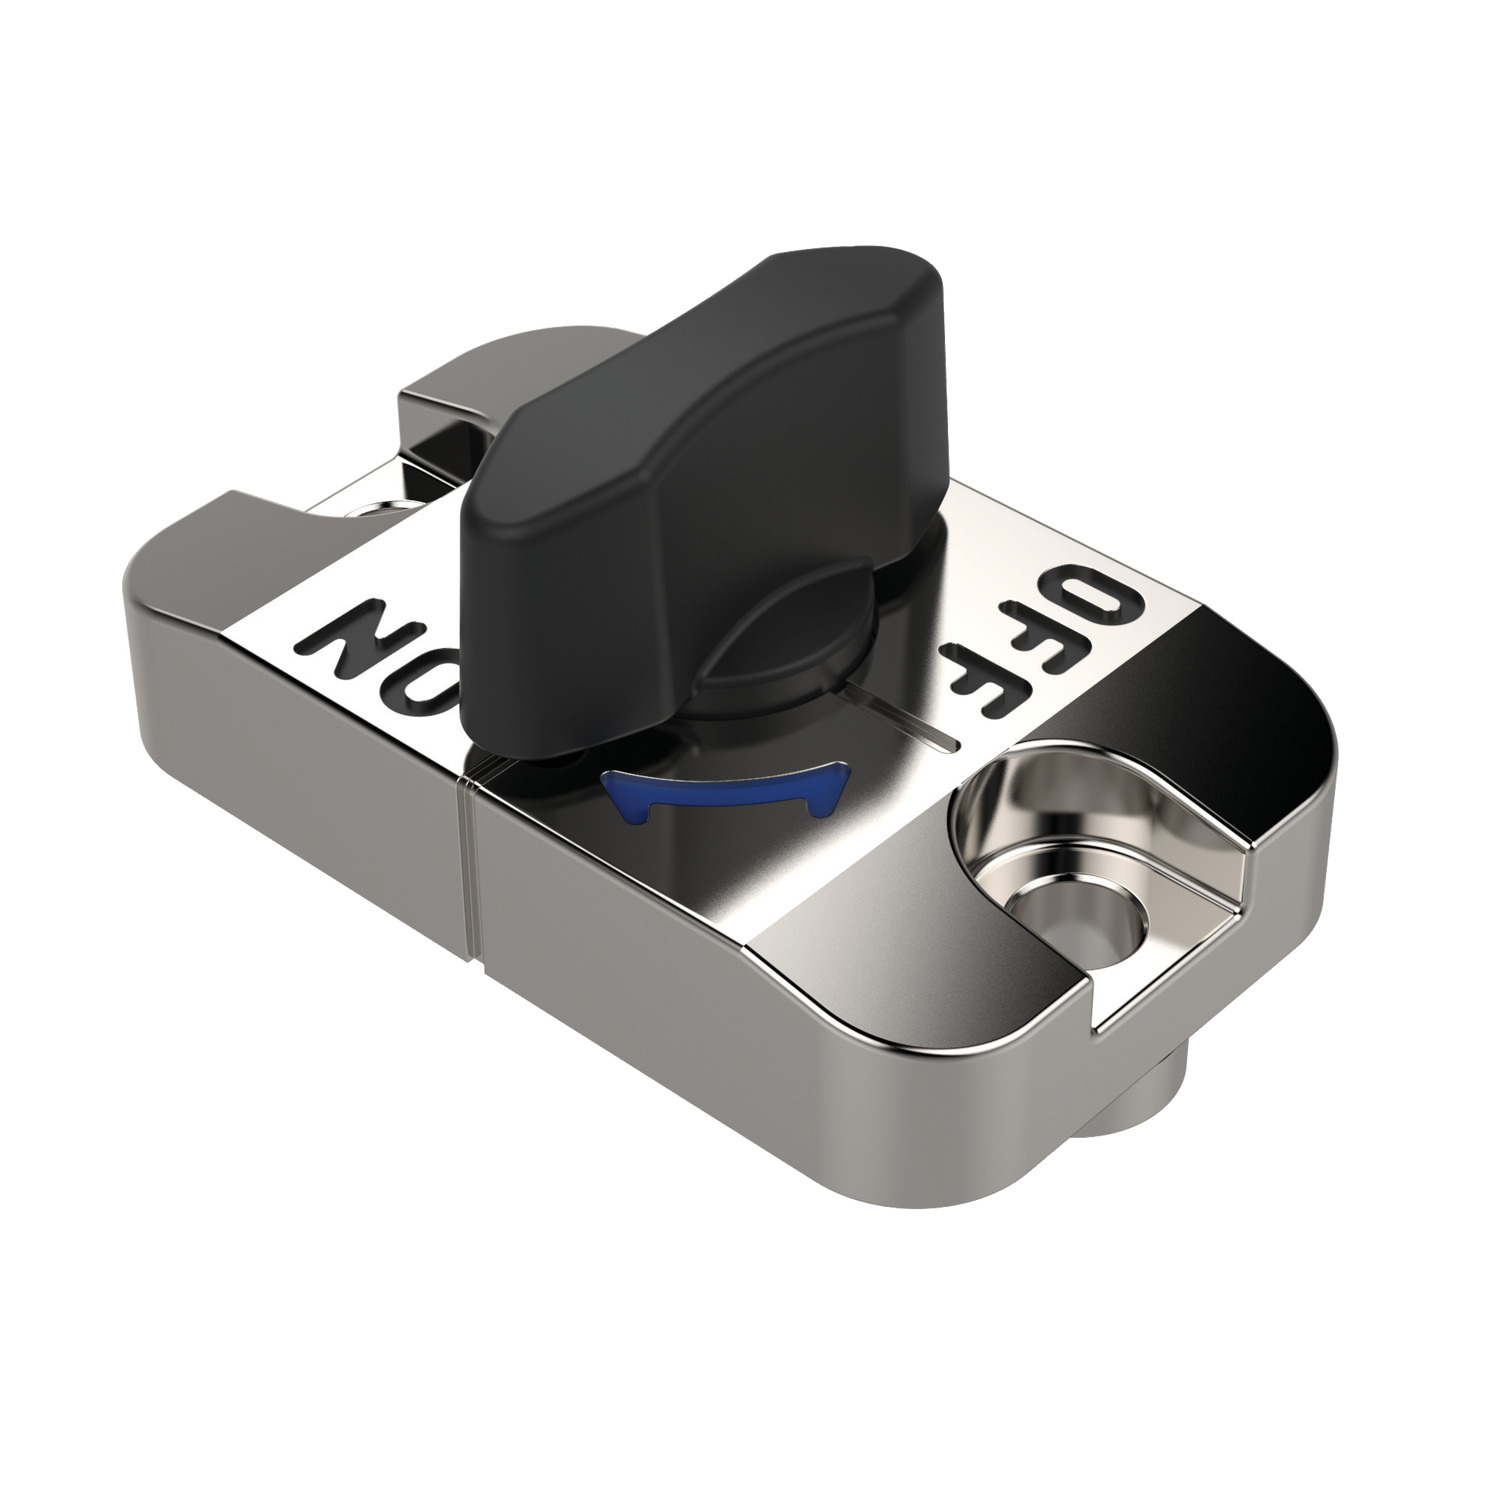 Sliding Clamps - for Slotted Hole Slotted hole sliding clamp one-touch fastener designed for quick positioning of sliding bars, actuated via quarter turn t-handle. Suitable for linear movement on fully intact bars.